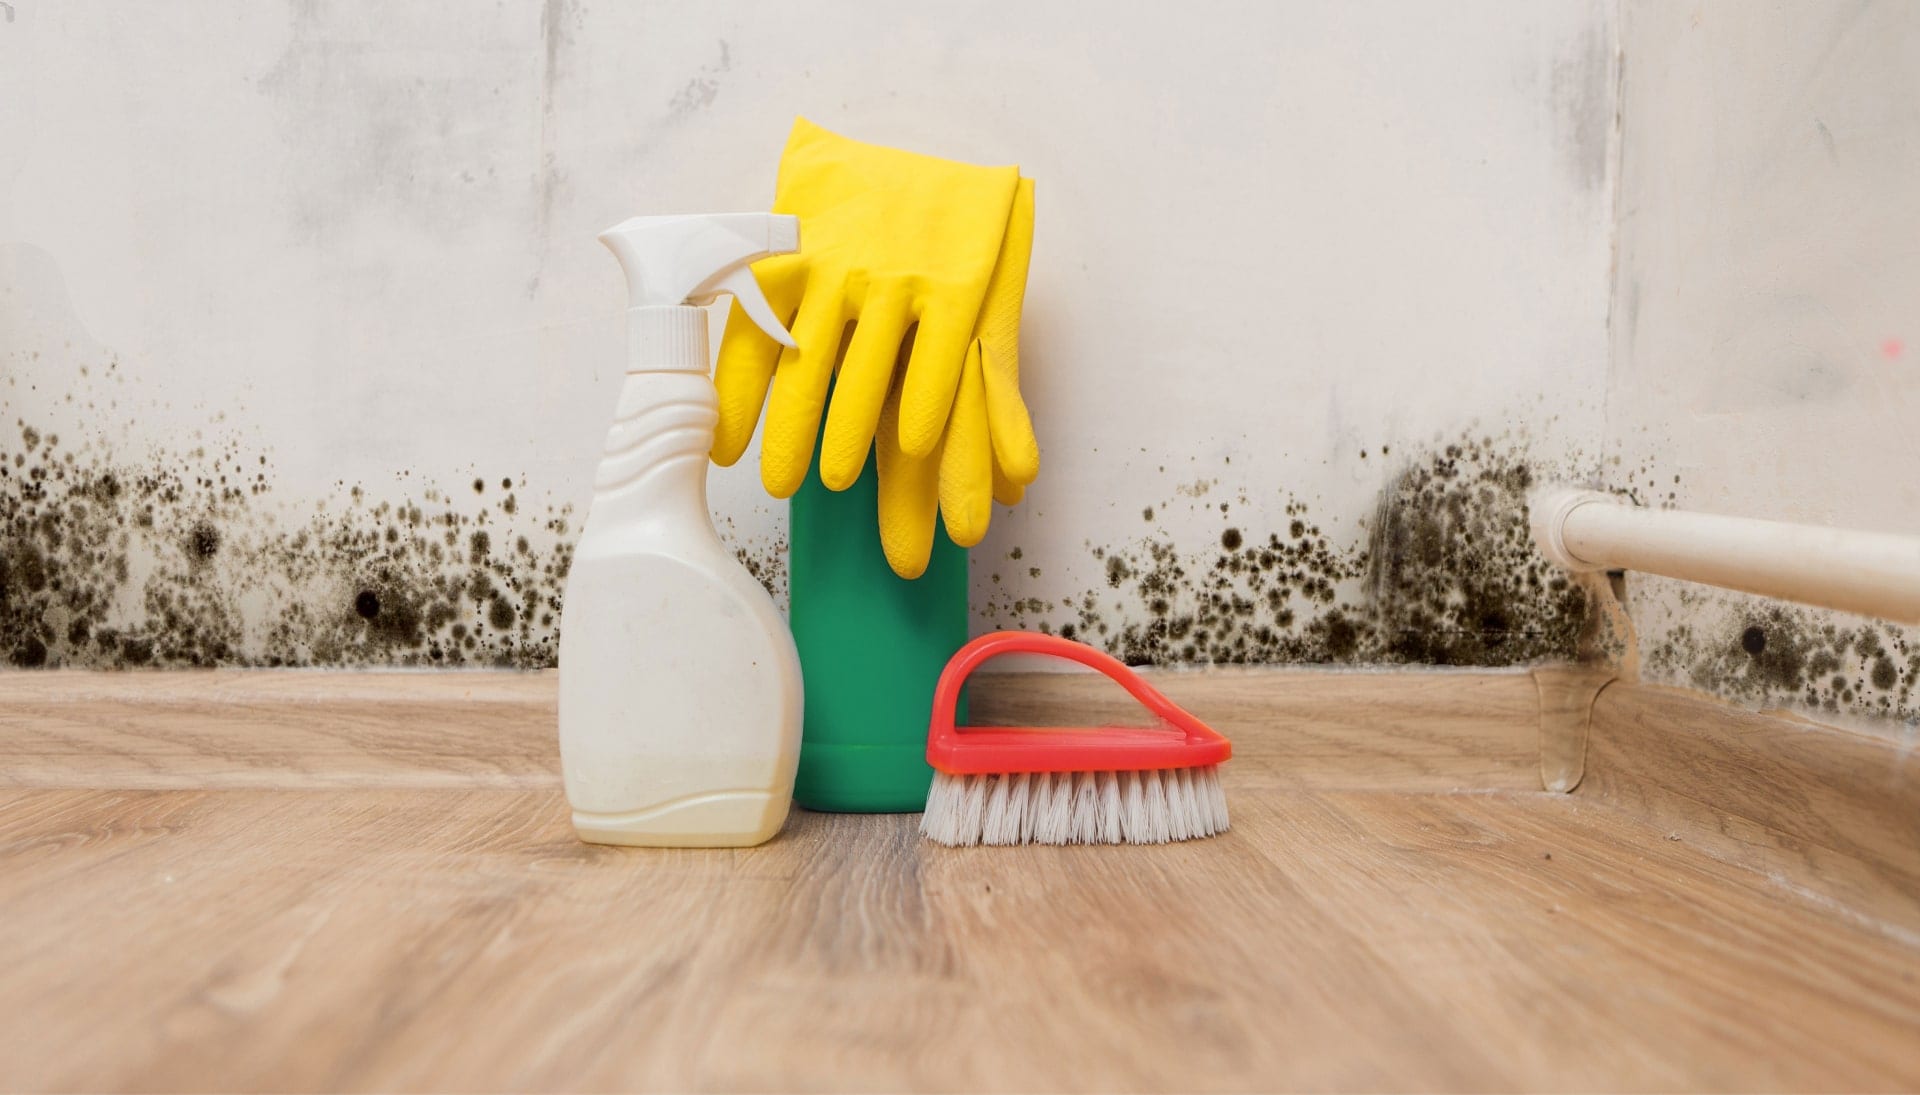 We offer fast and reliable services to help remove and prevent mold growth in your home or business in Peoria, Arizona